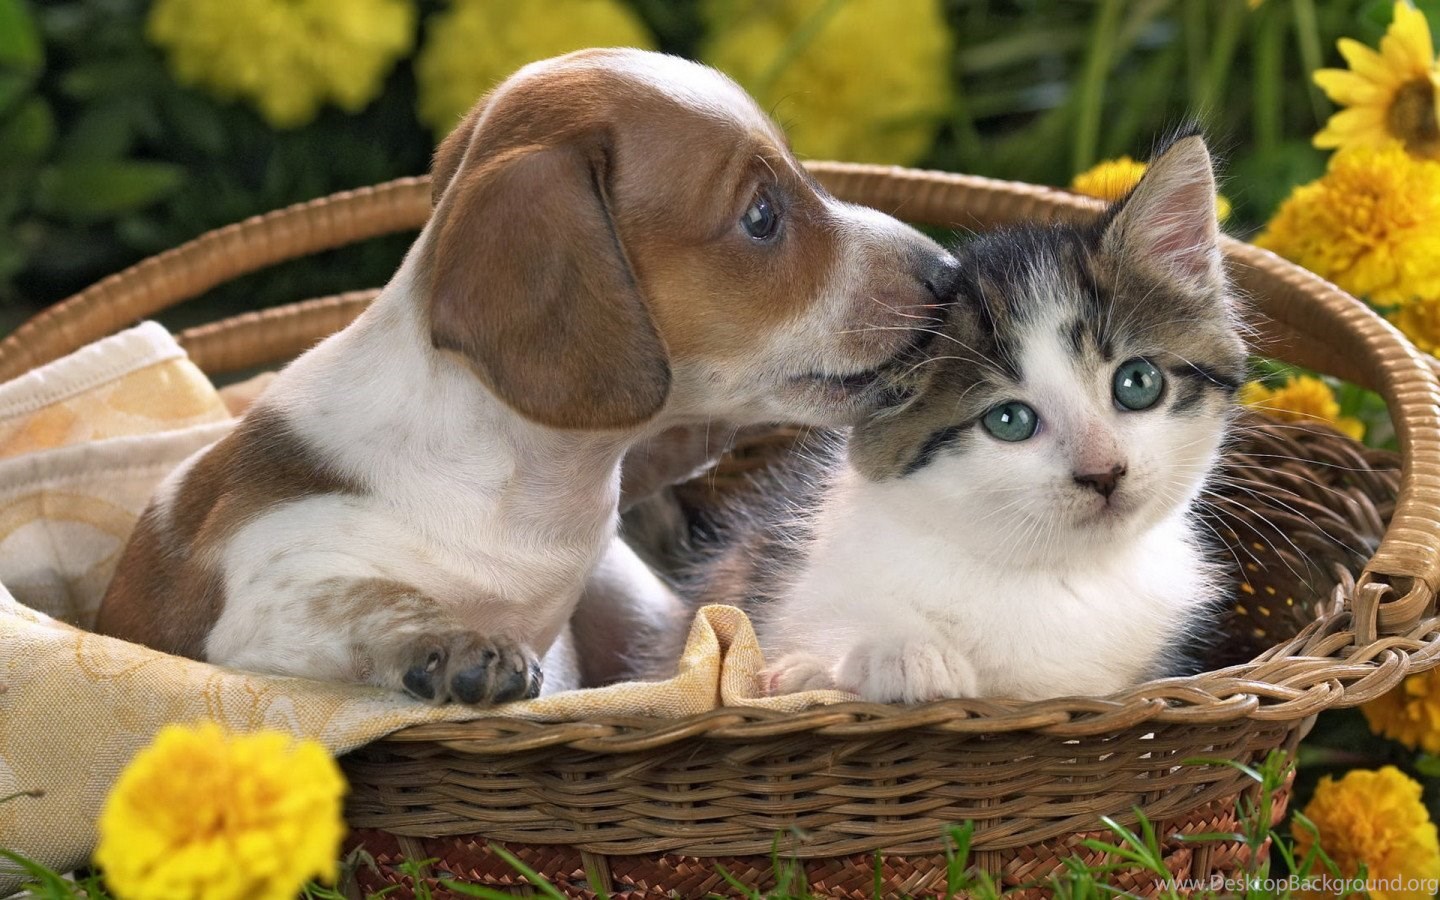 Cute Kittens And Puppies Together Wallpaper Desktop Background